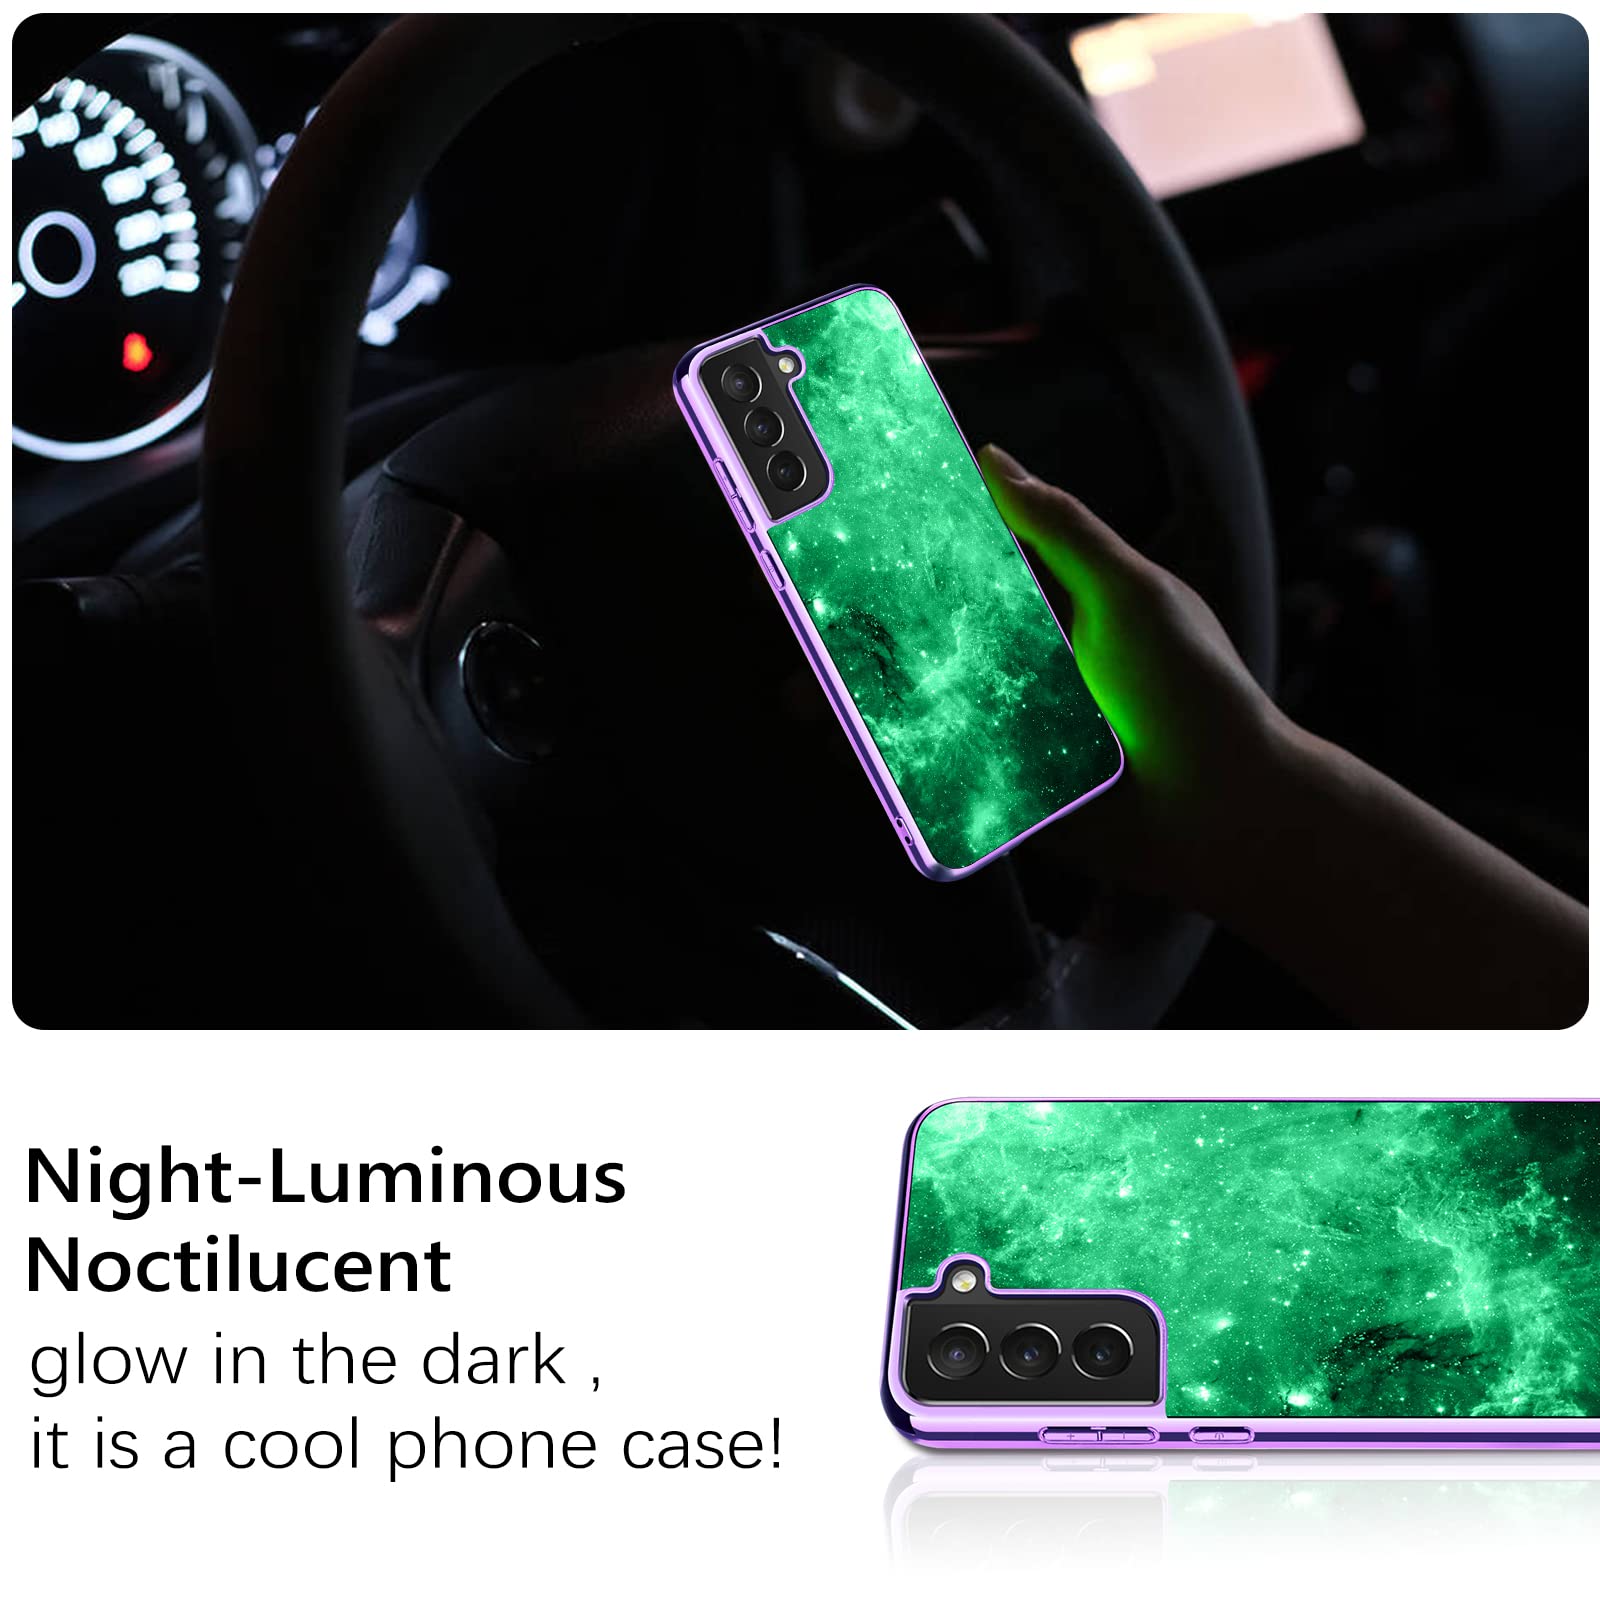 GUAGUA Compatible with Samsung Galaxy S21 FE 5G Case 6.4 Inch Glow in The Dark Noctilucent Luminous Space Nebula Slim Fit Cover Protective Anti Scratch Case for Galaxy S21 FE, Blue/Purple